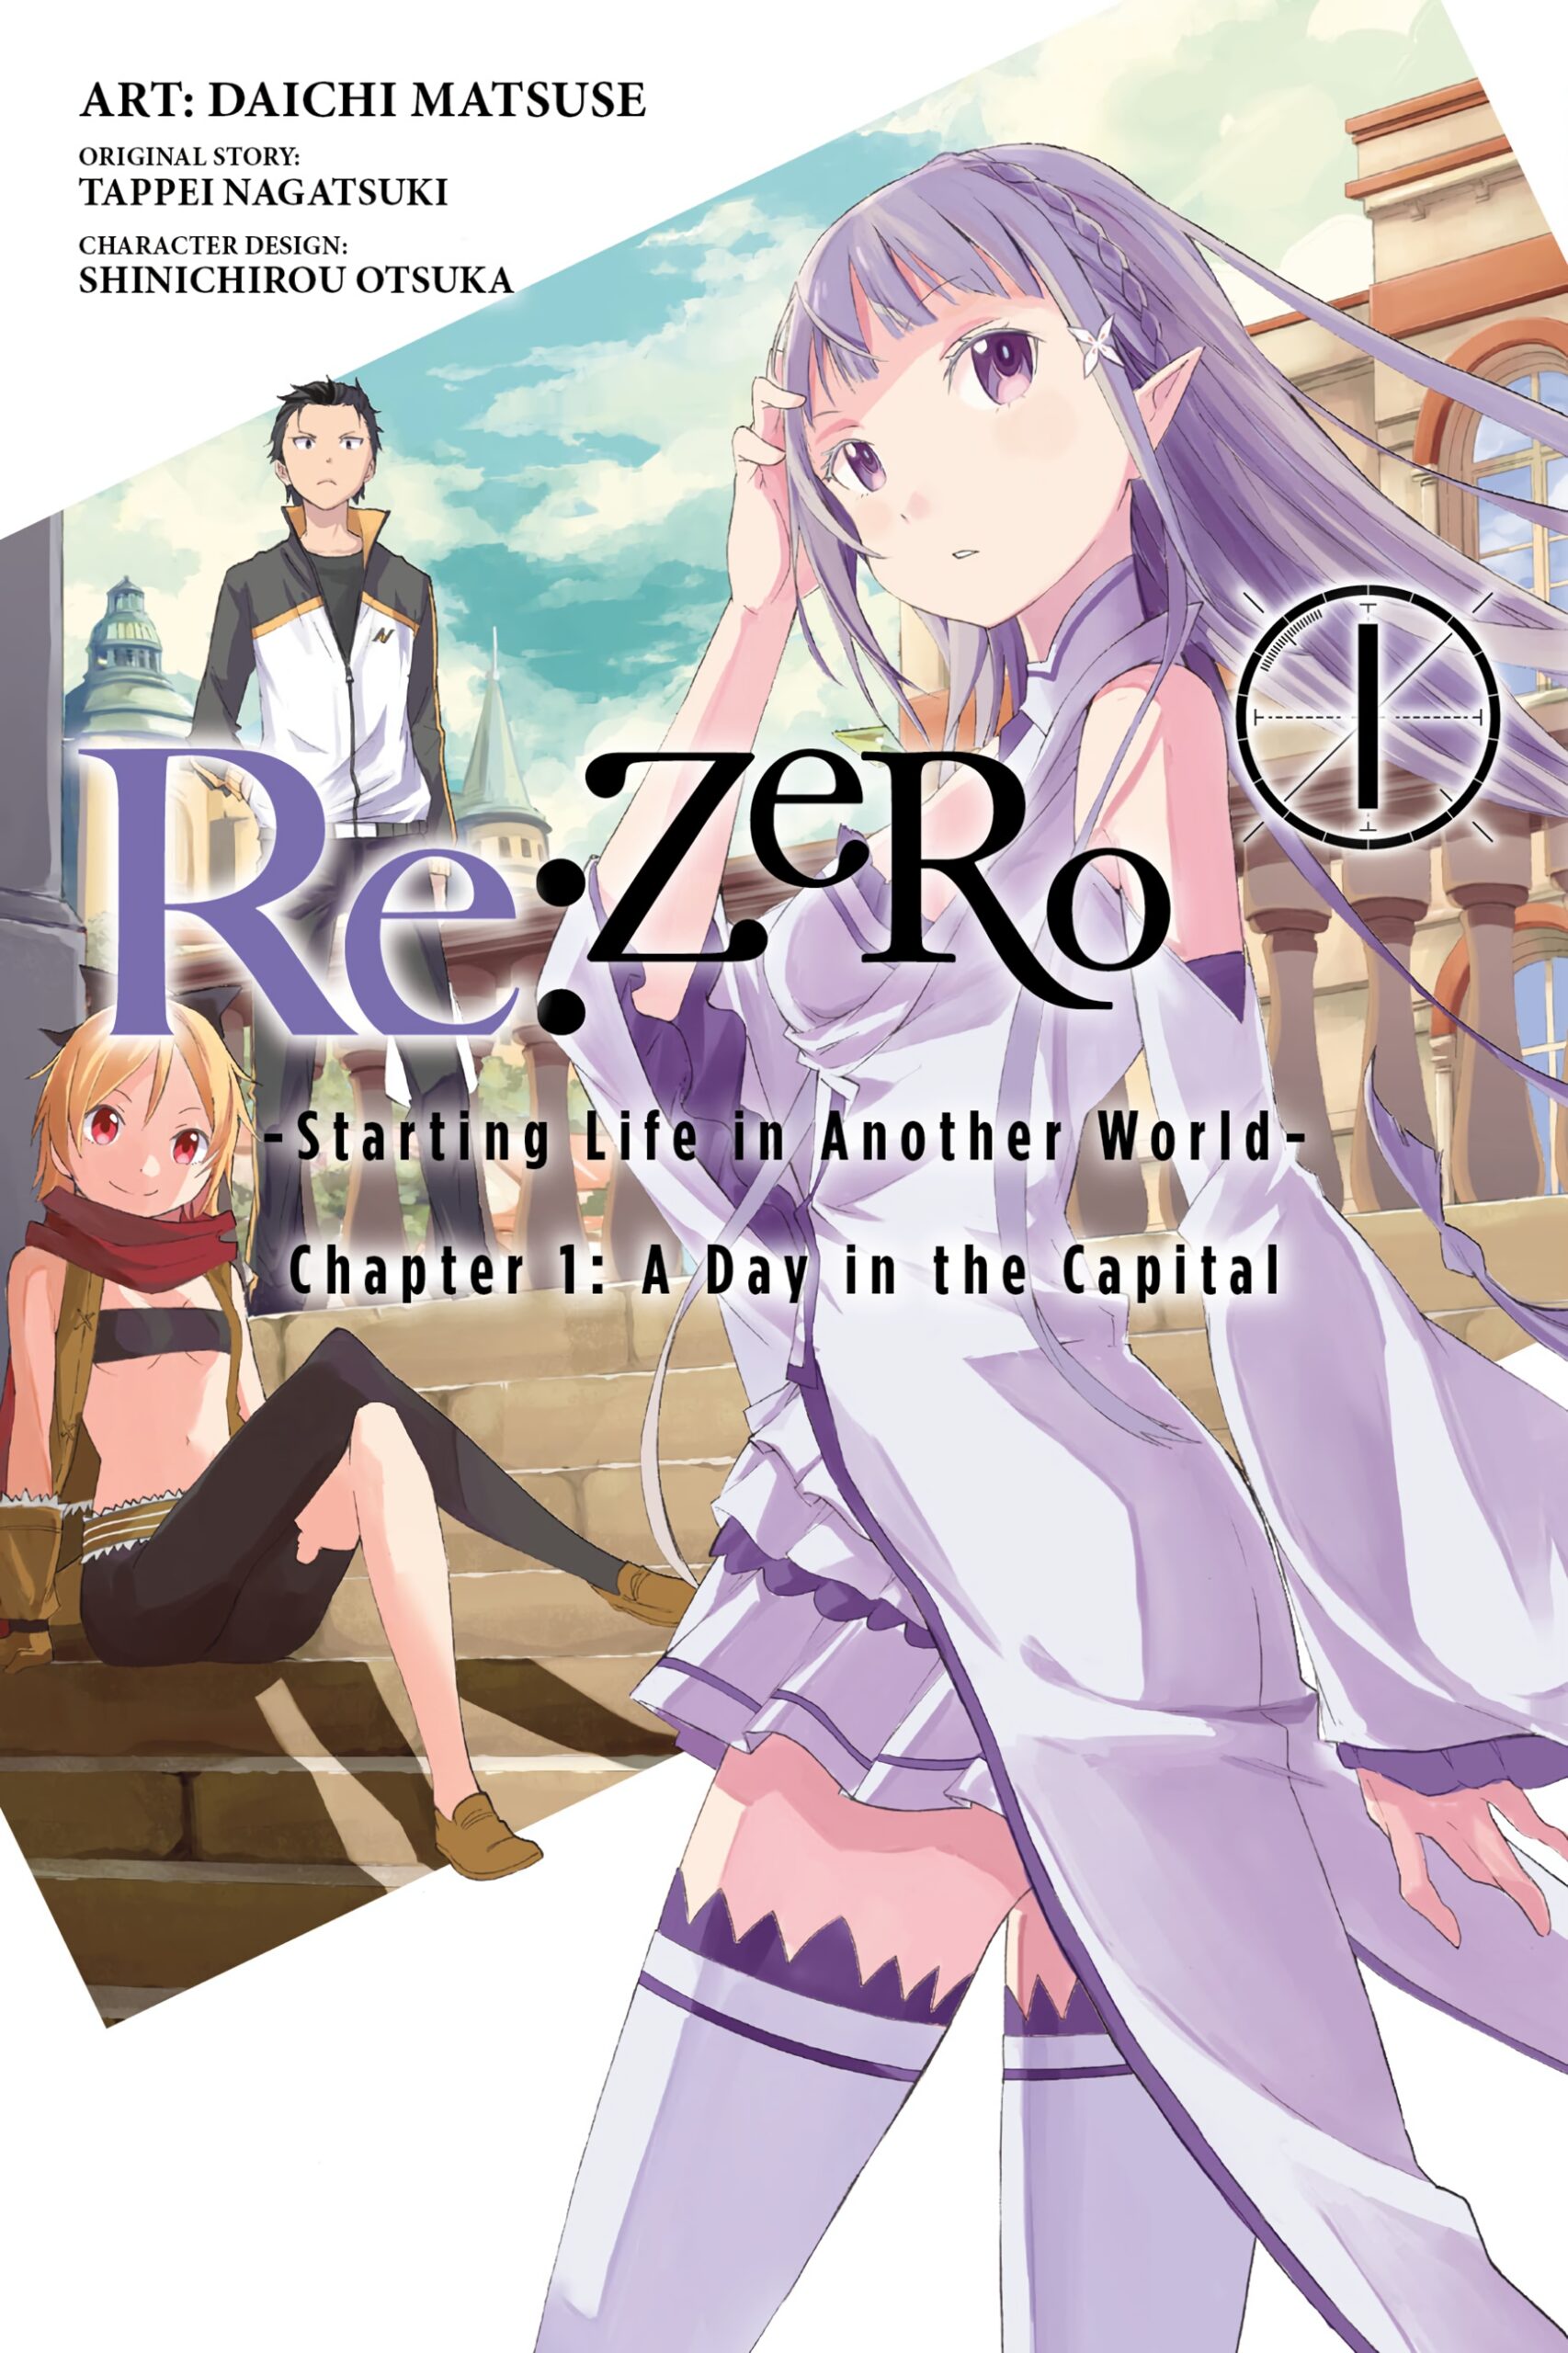 ReZERO Starting Life in Another World – Chapter 1 – A Day in the Capital – c001 (v01) – p000 [Cover] [dig] [Yen Press] [LuCaZ]